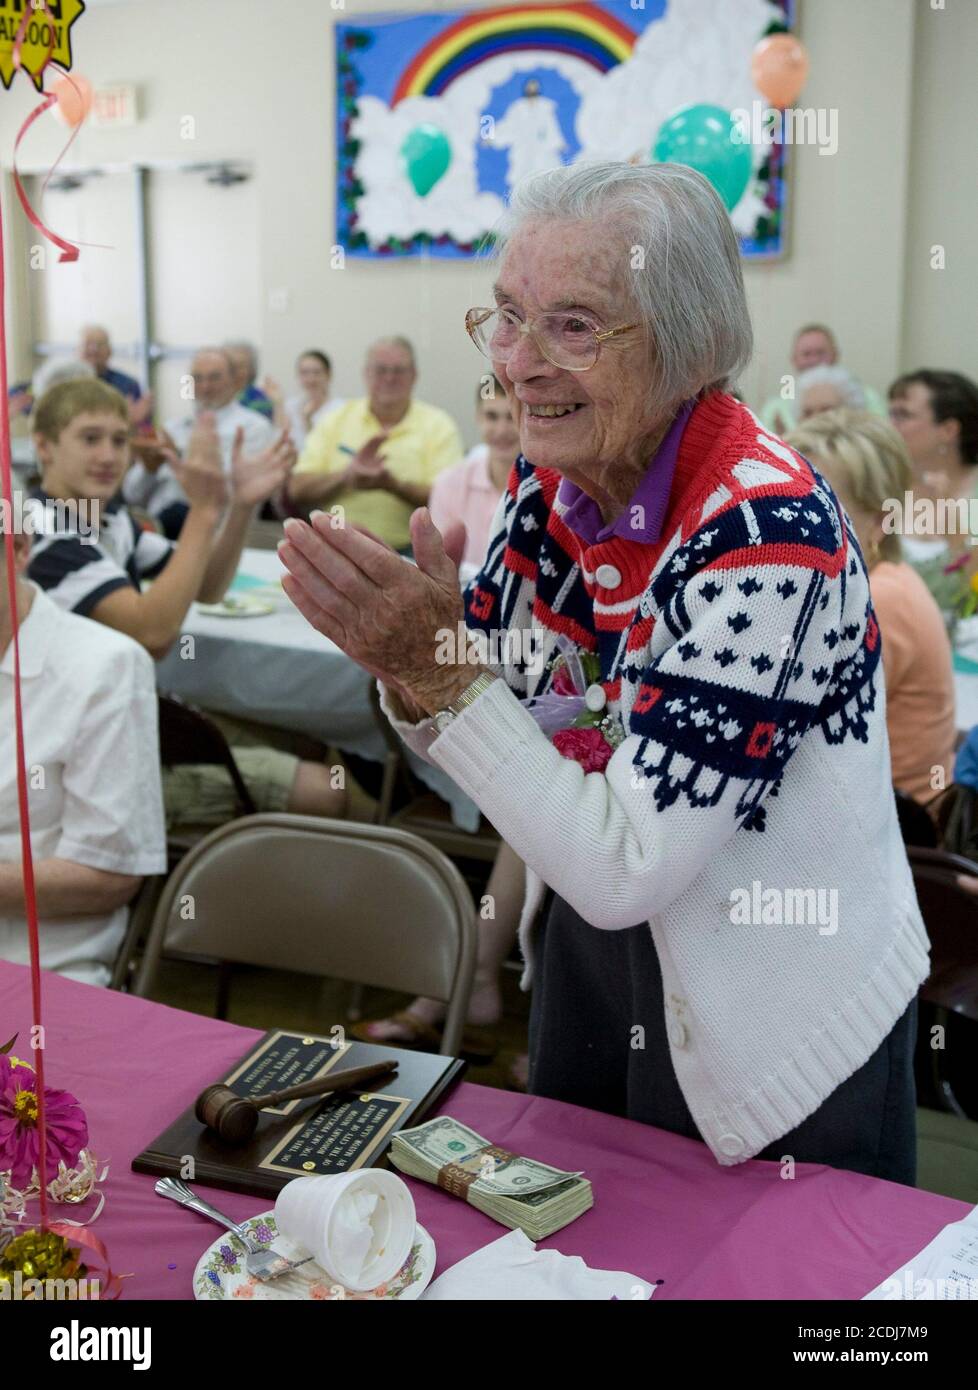 Burnet, TX September 16, 2007: Ursula Kramer, who was born September 16, 1907 in rural Germany, is the center of attention at her 100th birthday party at First Lutheran Church. Kramer fled Germany under Hitler in her early 30's and emigrated to Texas before World War II. She was driving up until her 99th birthday. ©Bob Daemmrich Stock Photo